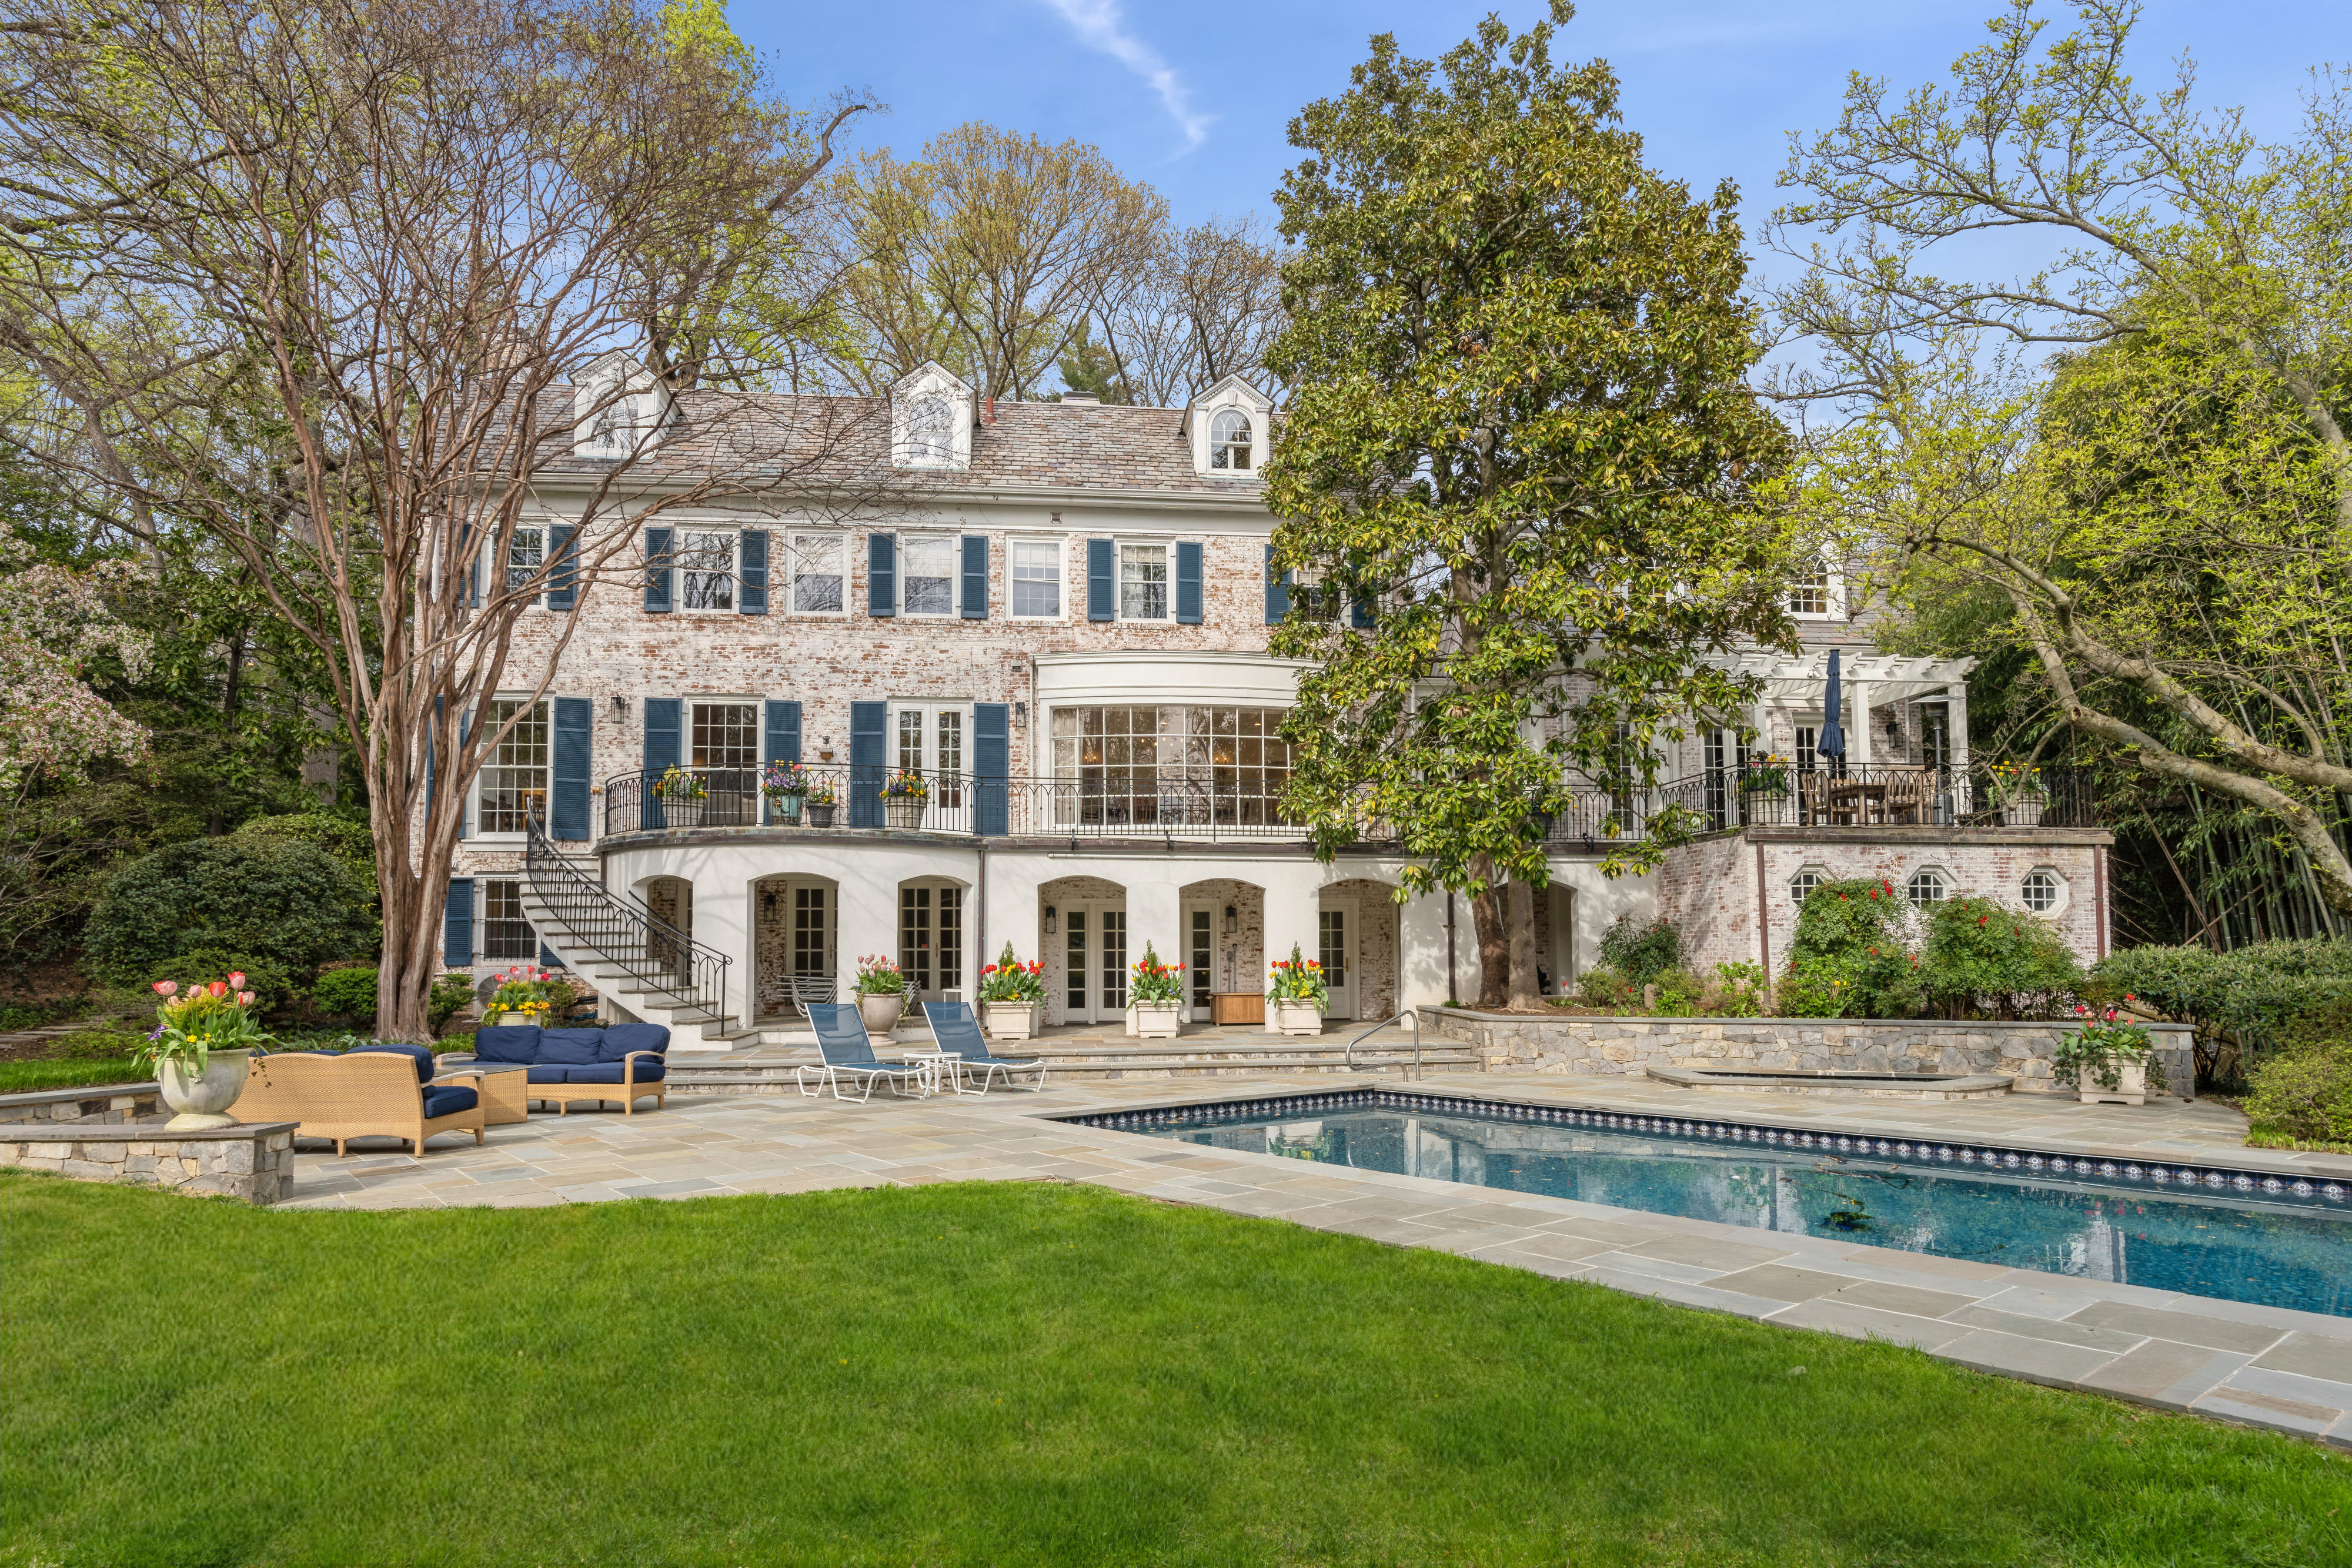 1941 colonial in d.c. on the market for nearly $7 million